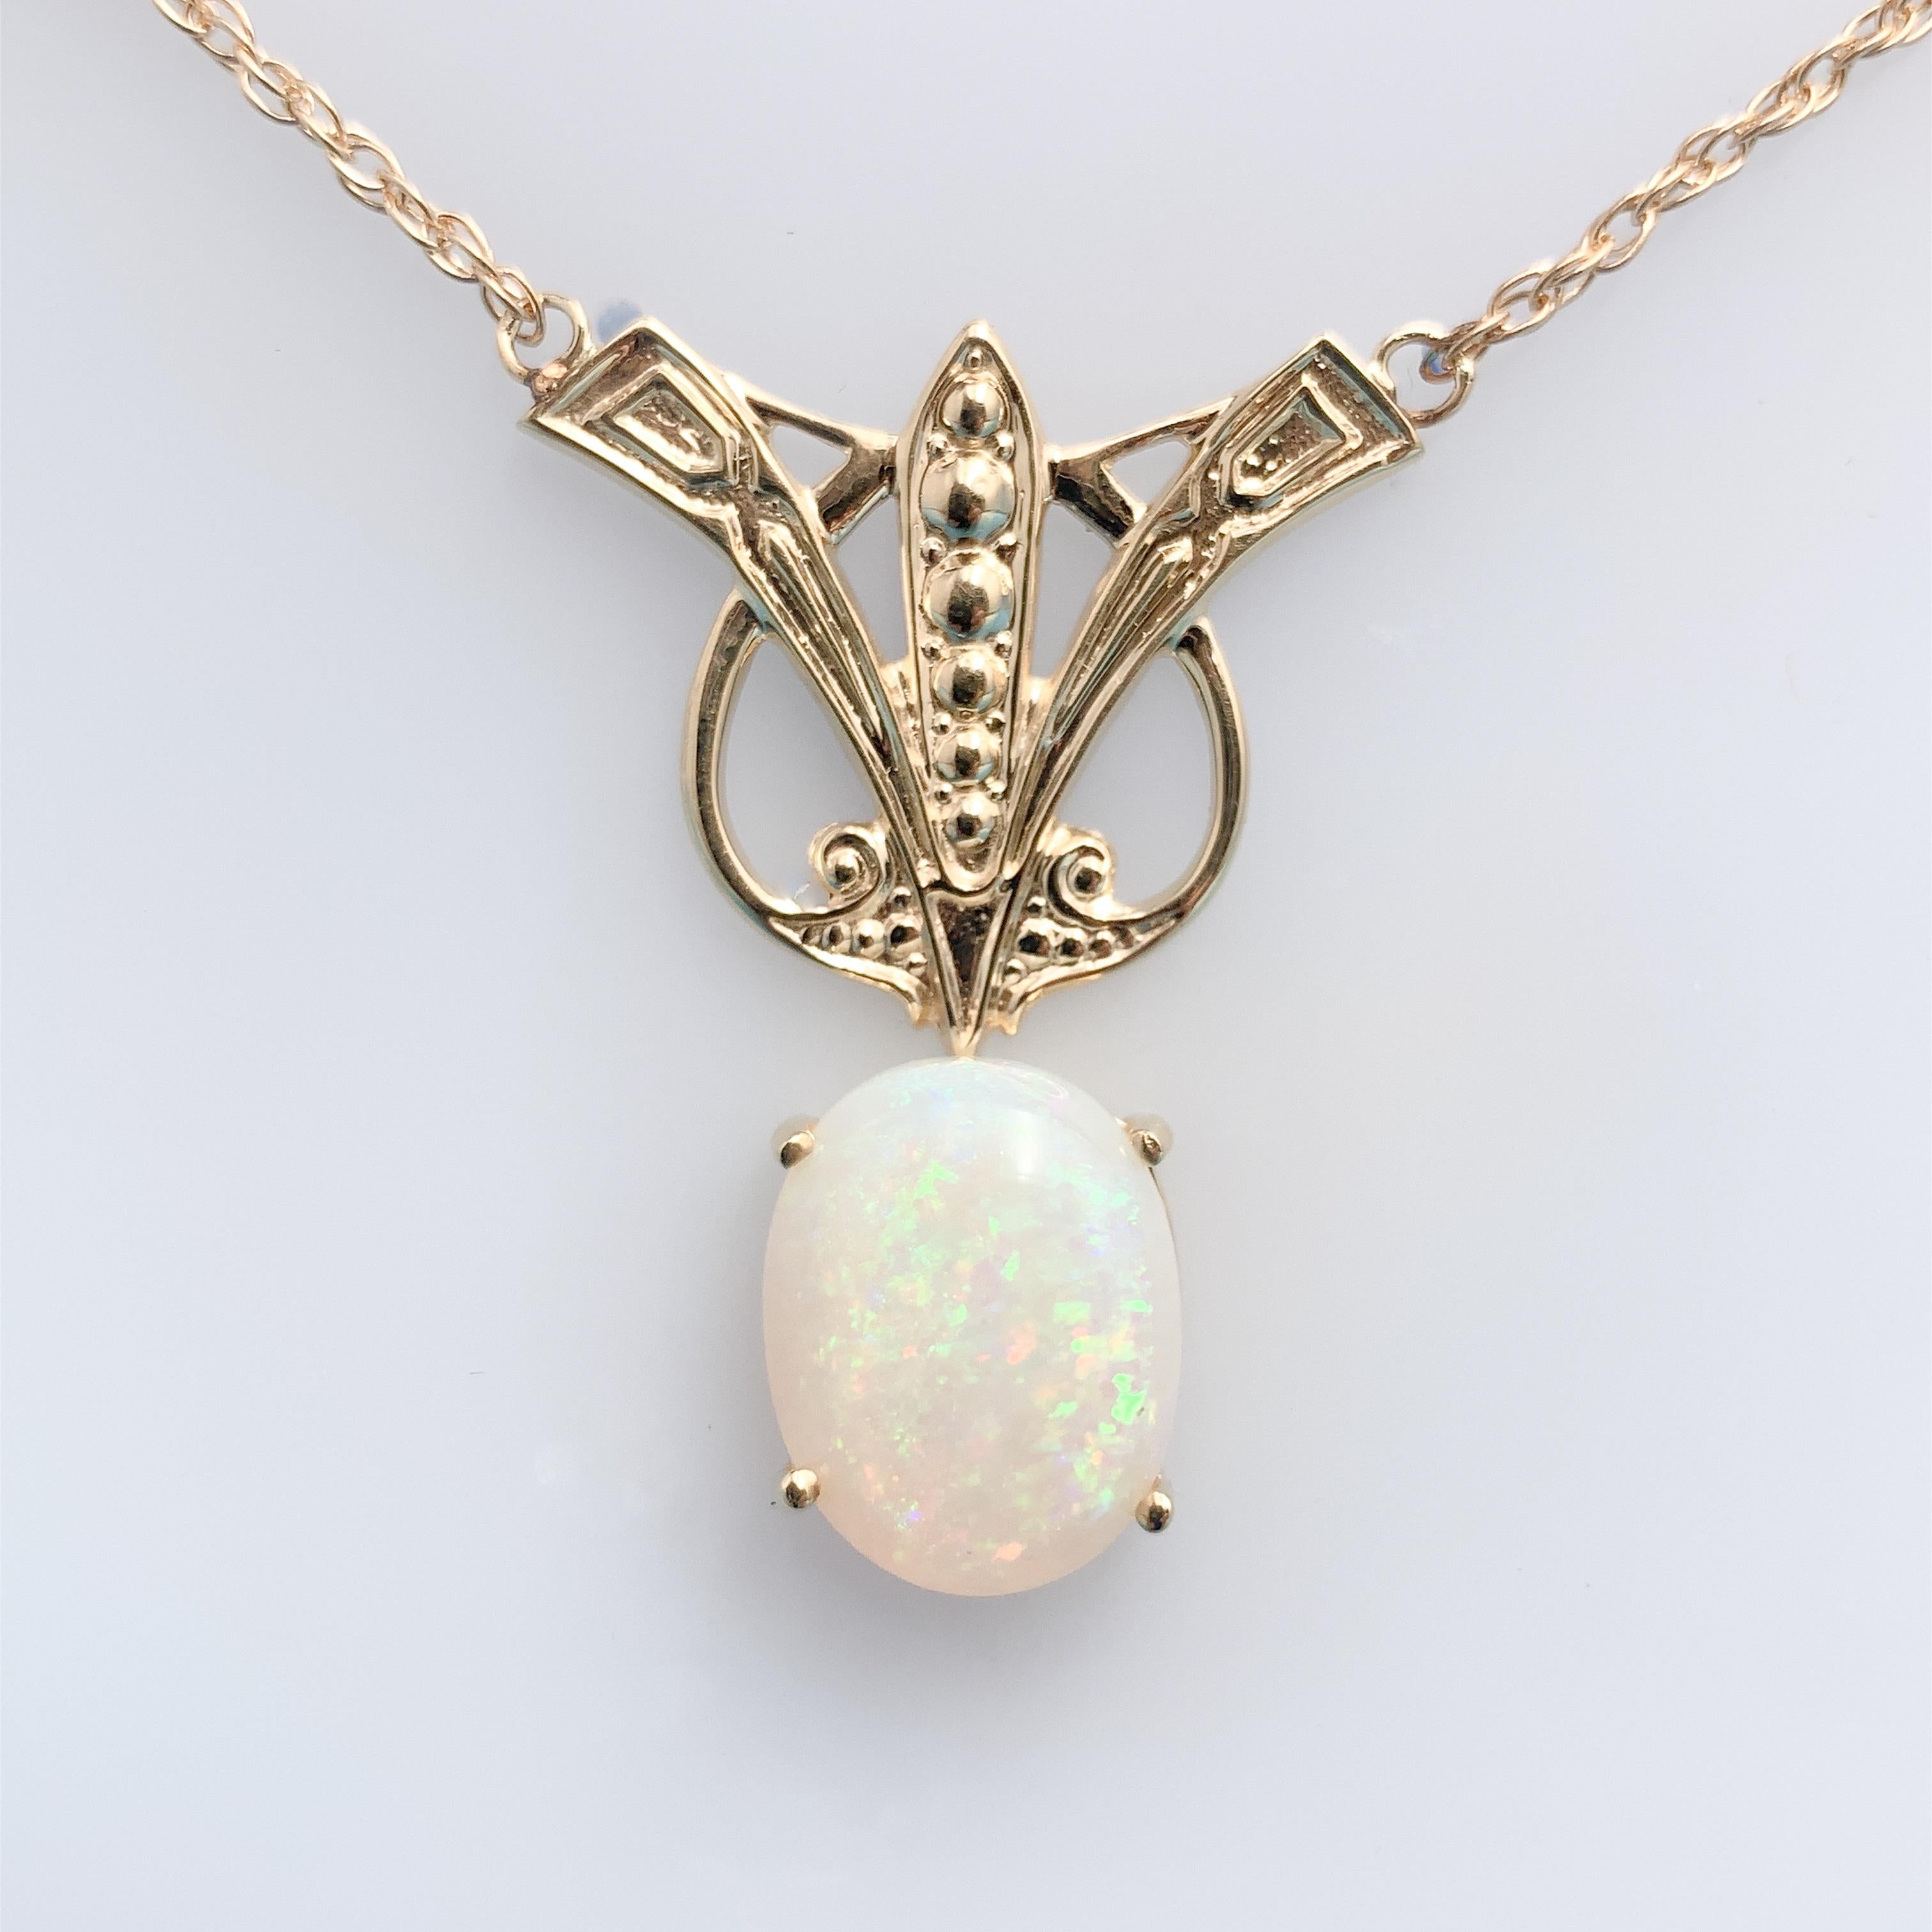 14k yellow gold opal necklace, an Arts & Crafts style casting that is newly made from the antique molds. The Australian opal has beautiful blue-green play of color with pink/red flashes. The oval opal measures about 12.4mm x 15.5mm and weighs 8